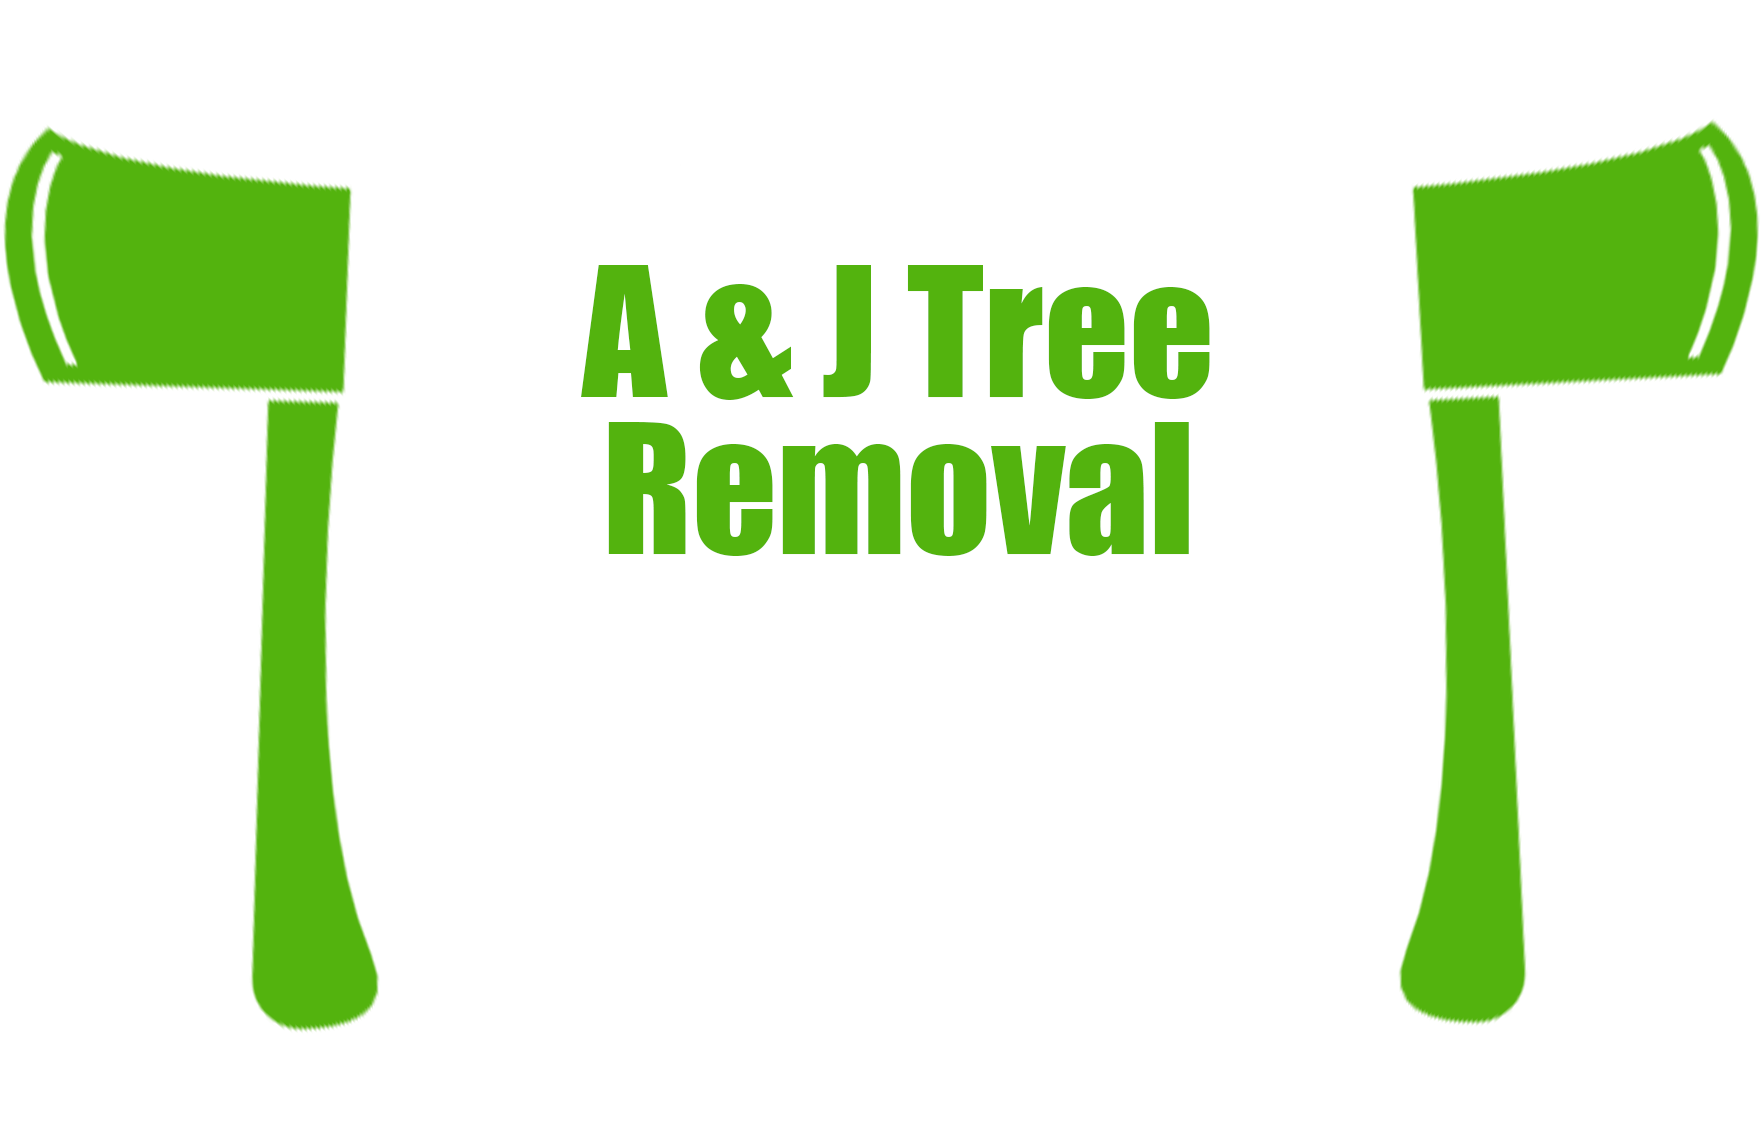 Tree Services, Removal, Trimming, Stump Grinding & - Milford (1906x1268)